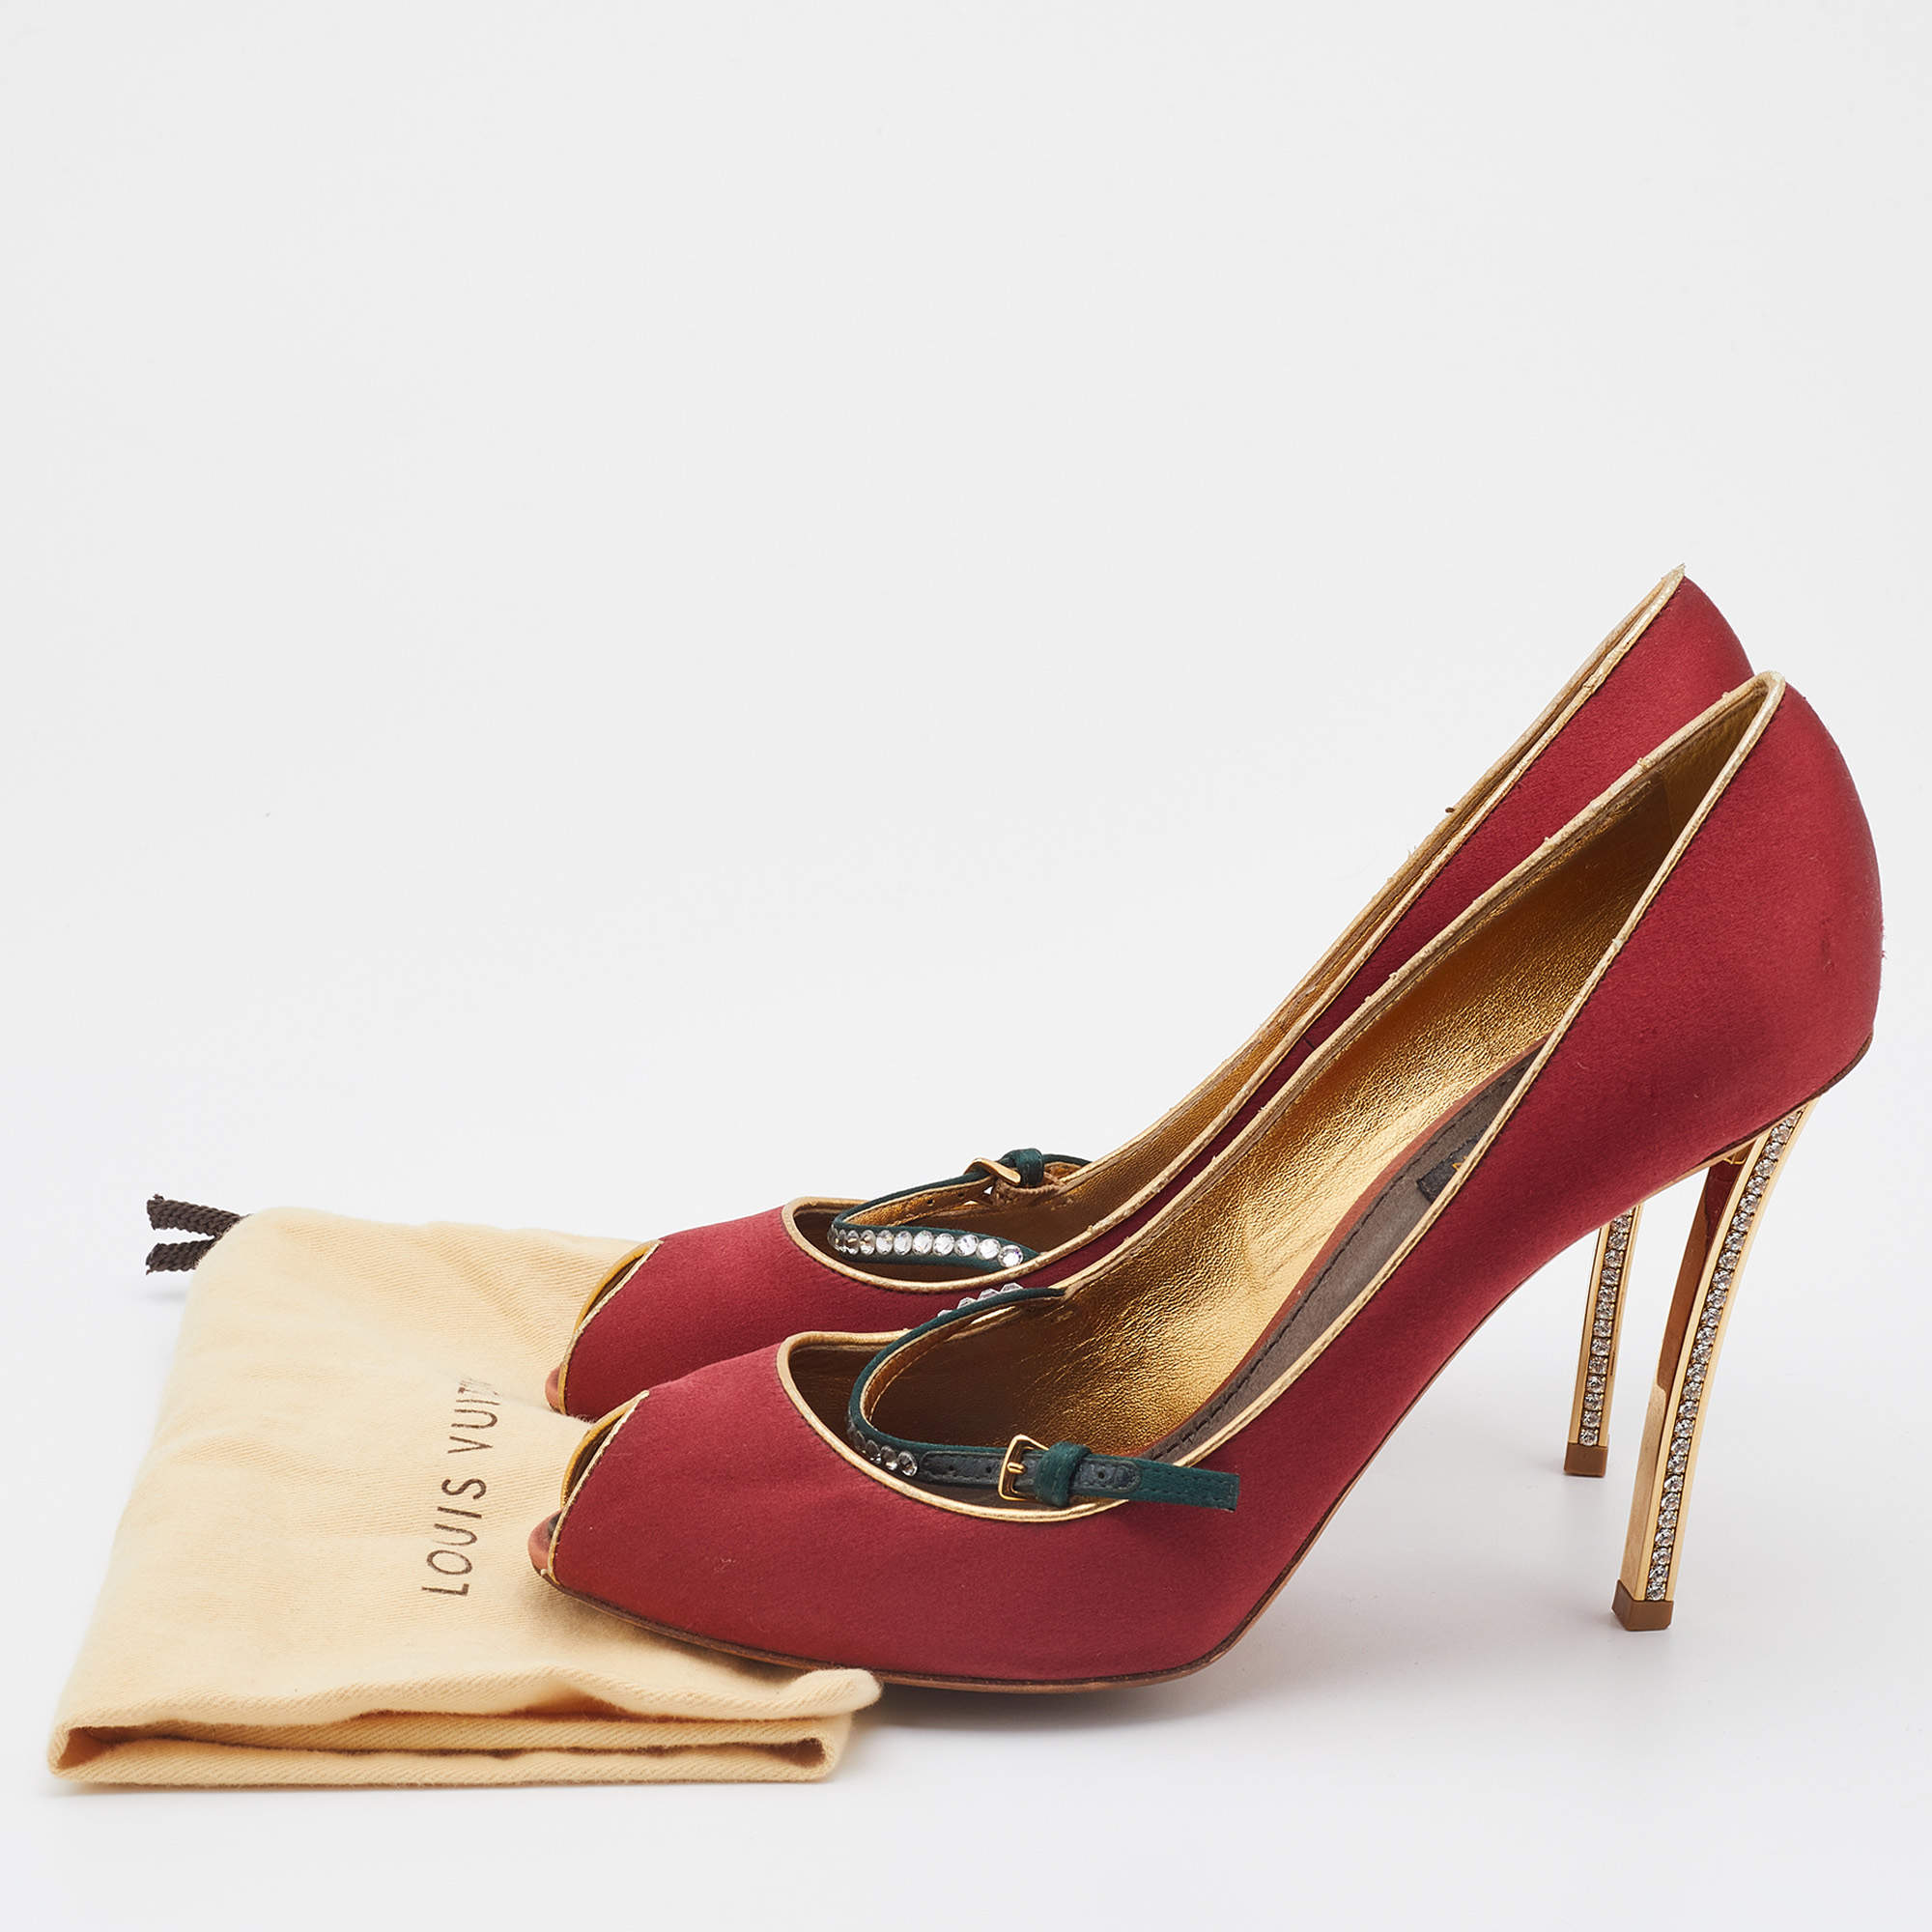 Louis Vuitton Red Satin Crystal Embellished Mary Jane Peep Toe